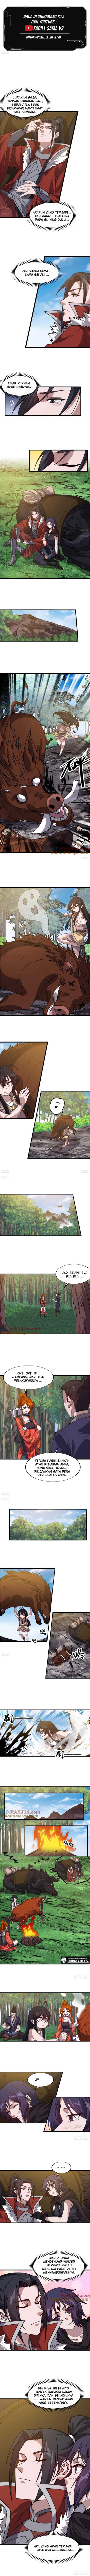 It Starts With A Mountain Chapter 754 bahasa Indonesia